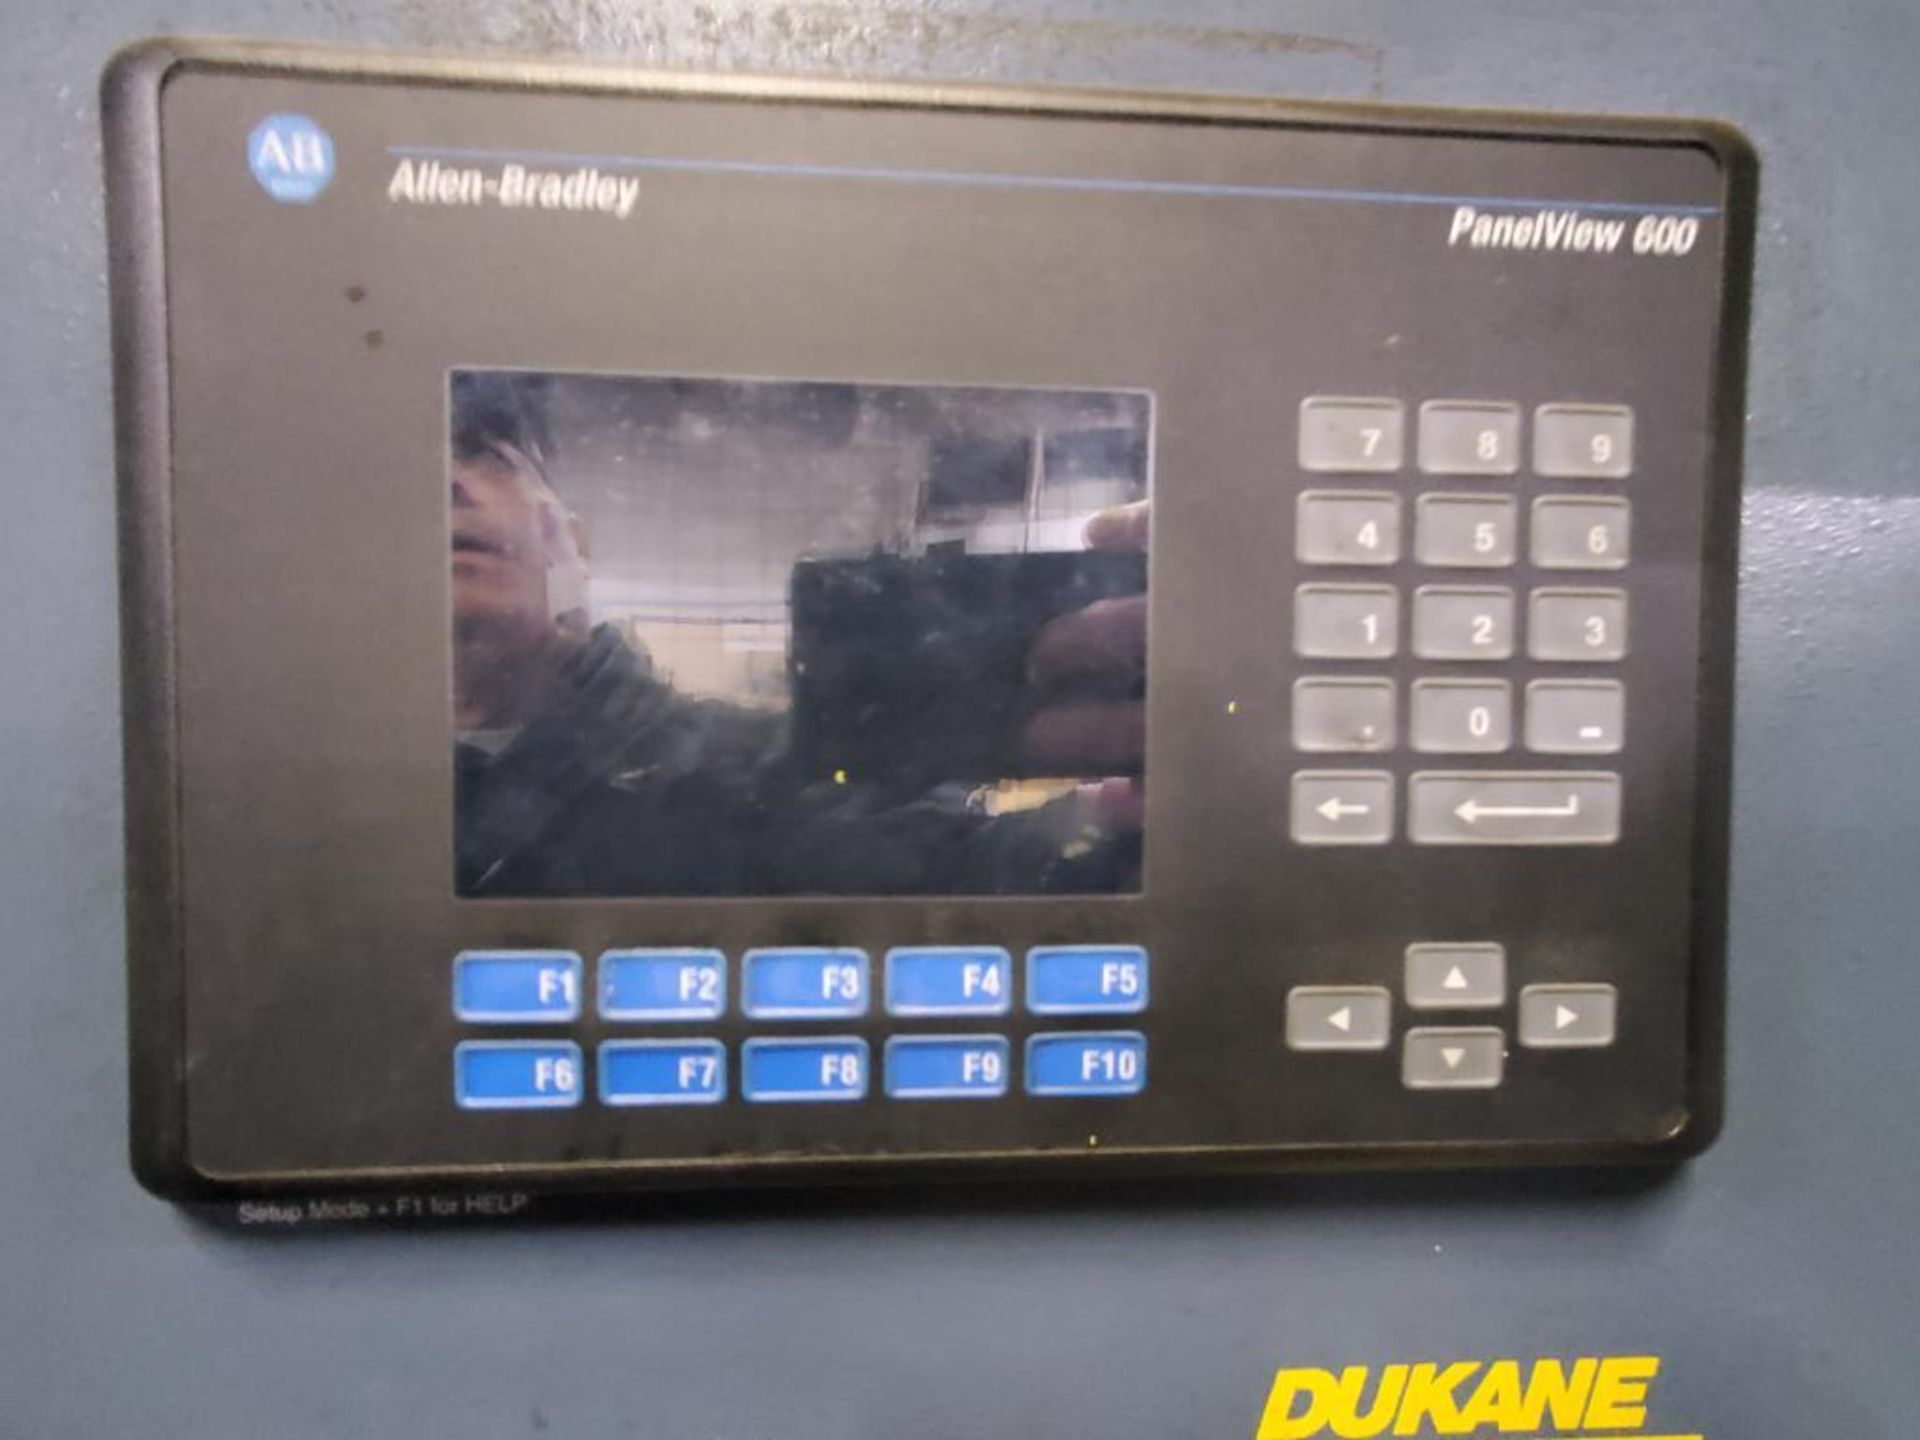 2004 Dukane VWB3700 Hydraulic Assembly Press, S/N US-197089, AB PanelView 600 DRO, Vibration Touch C - Image 6 of 11